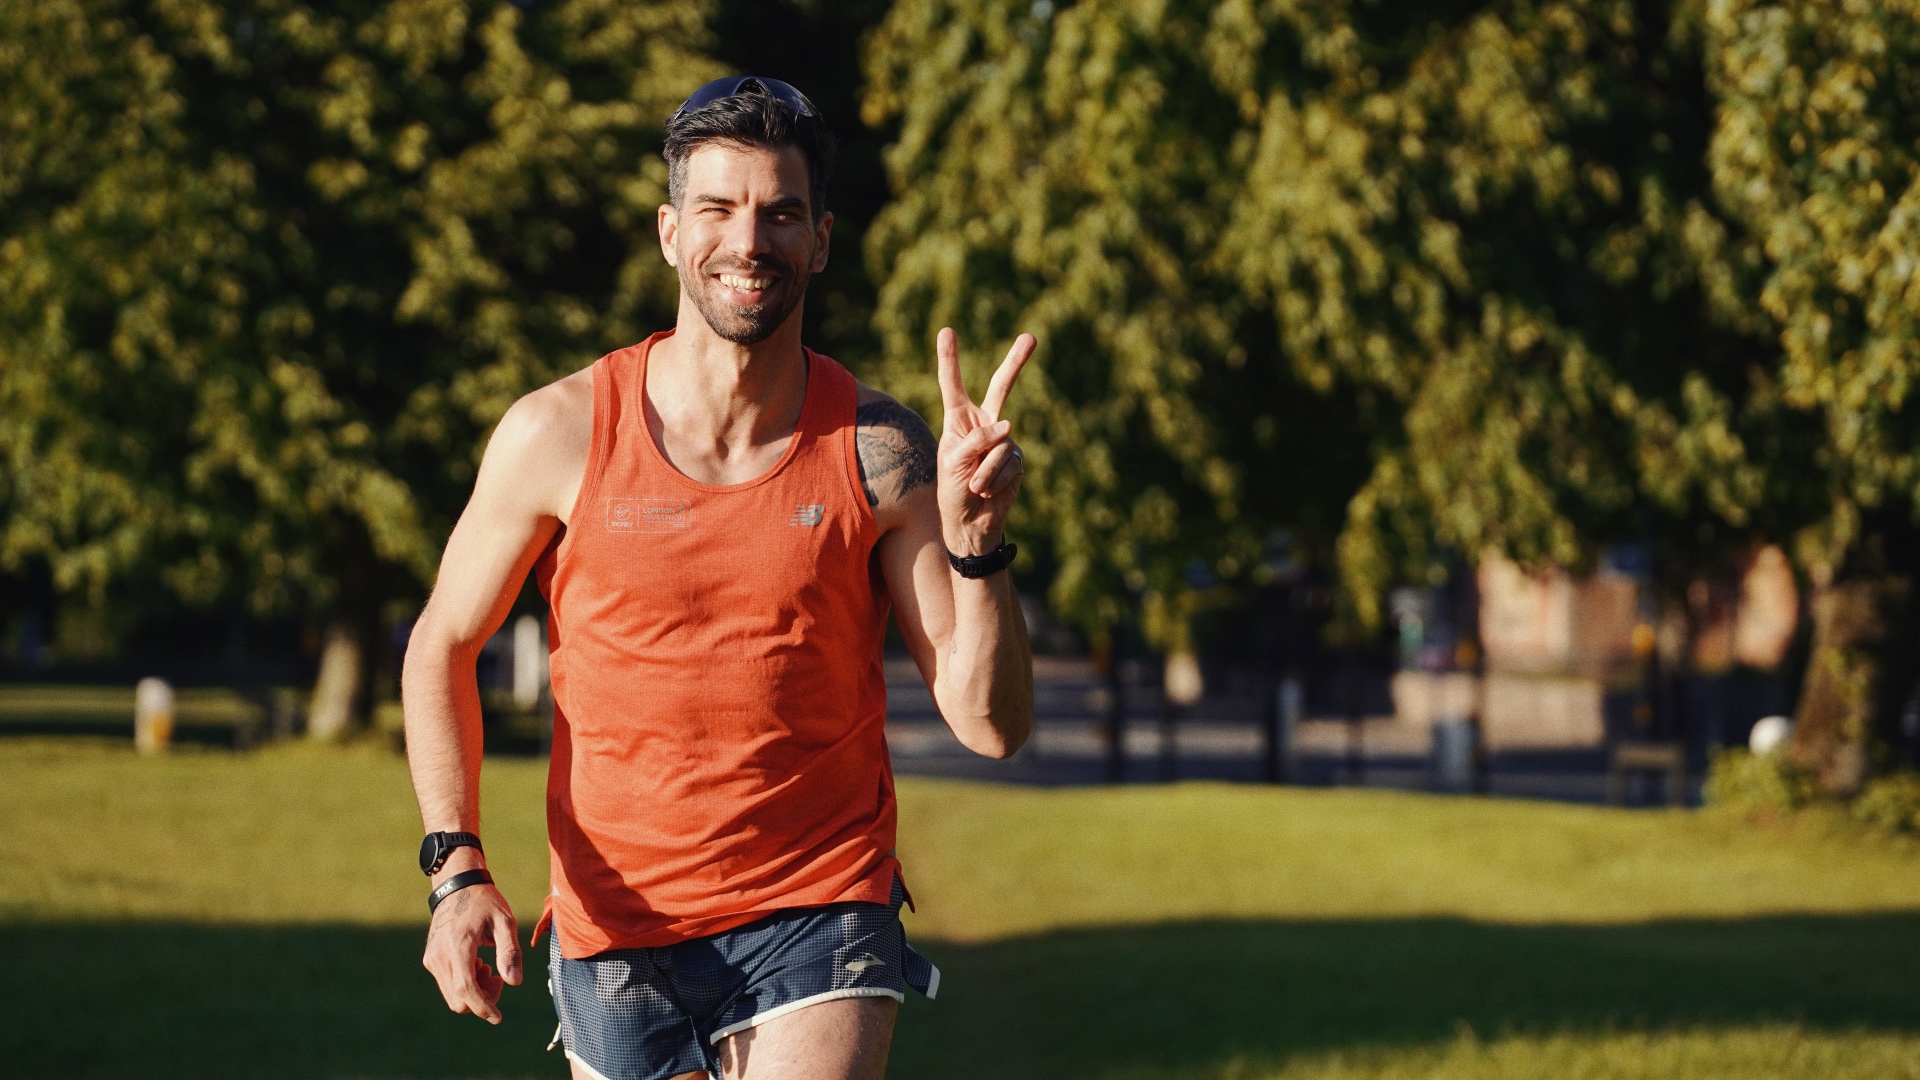 I ran a 10k every day for a week – 6 things I learned from the experience